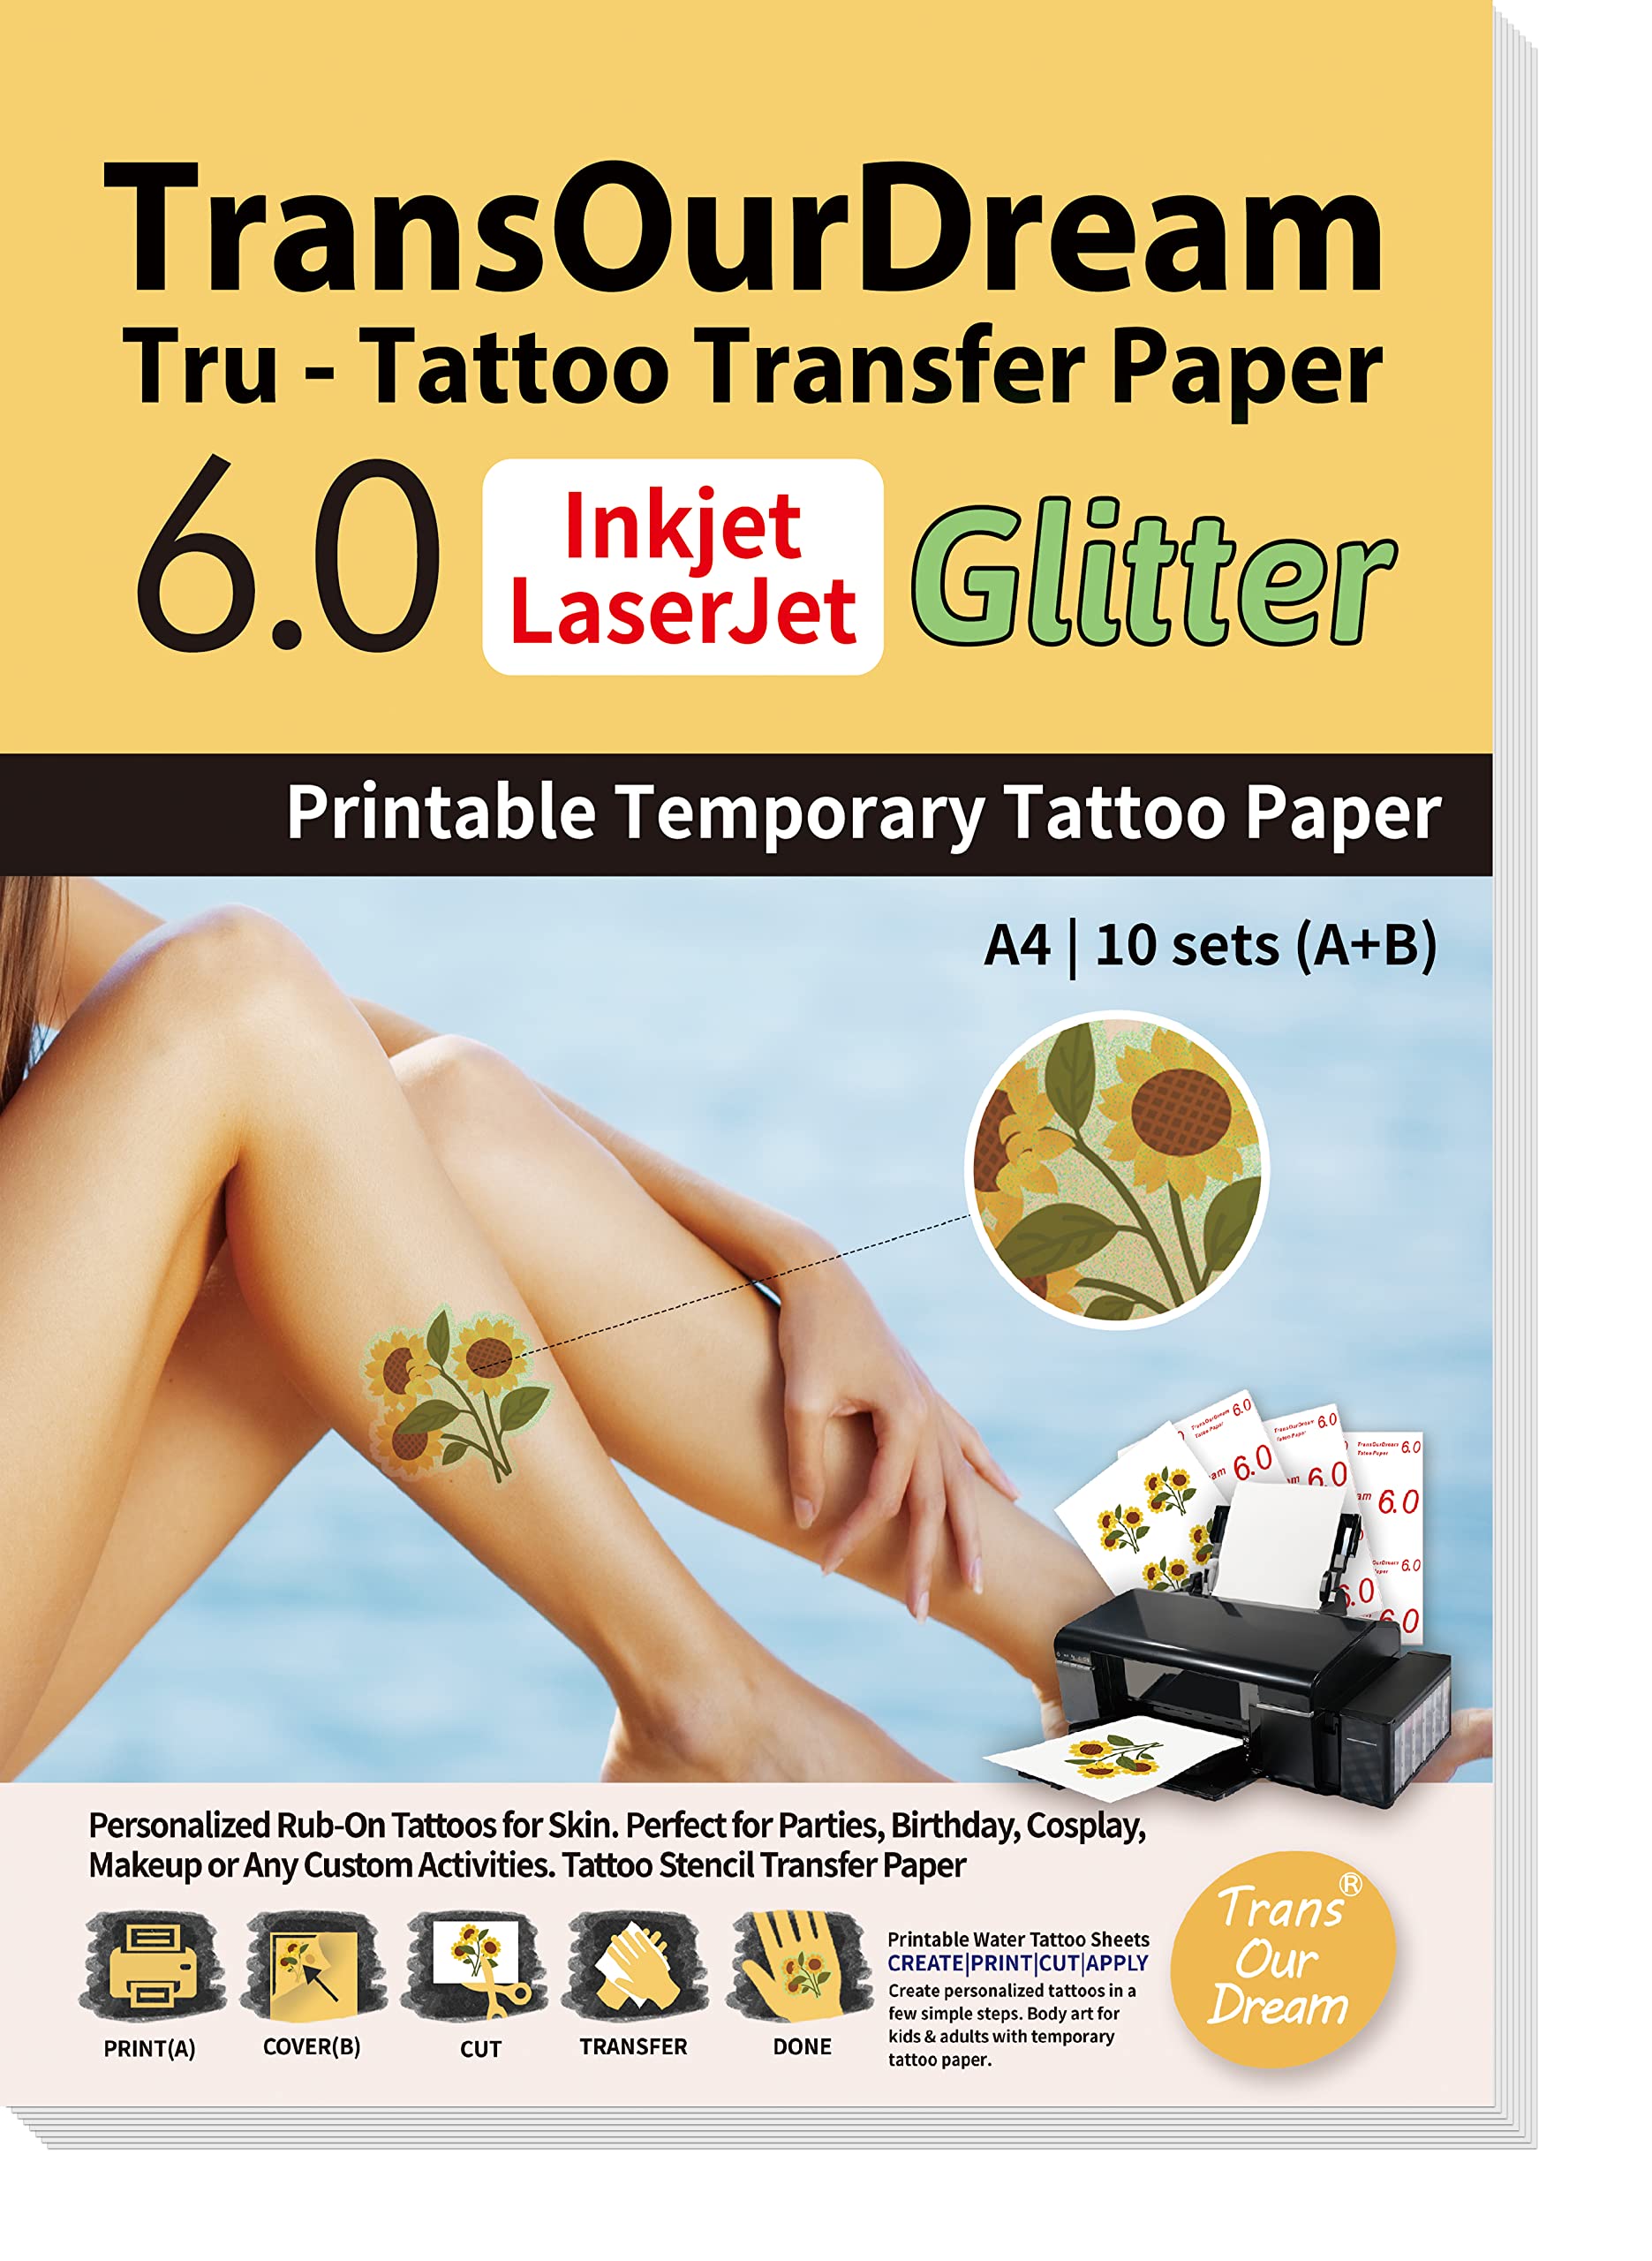 Temporary (Tattoo Paper) Inkjet - Laser Printable Make Personalized USA #1